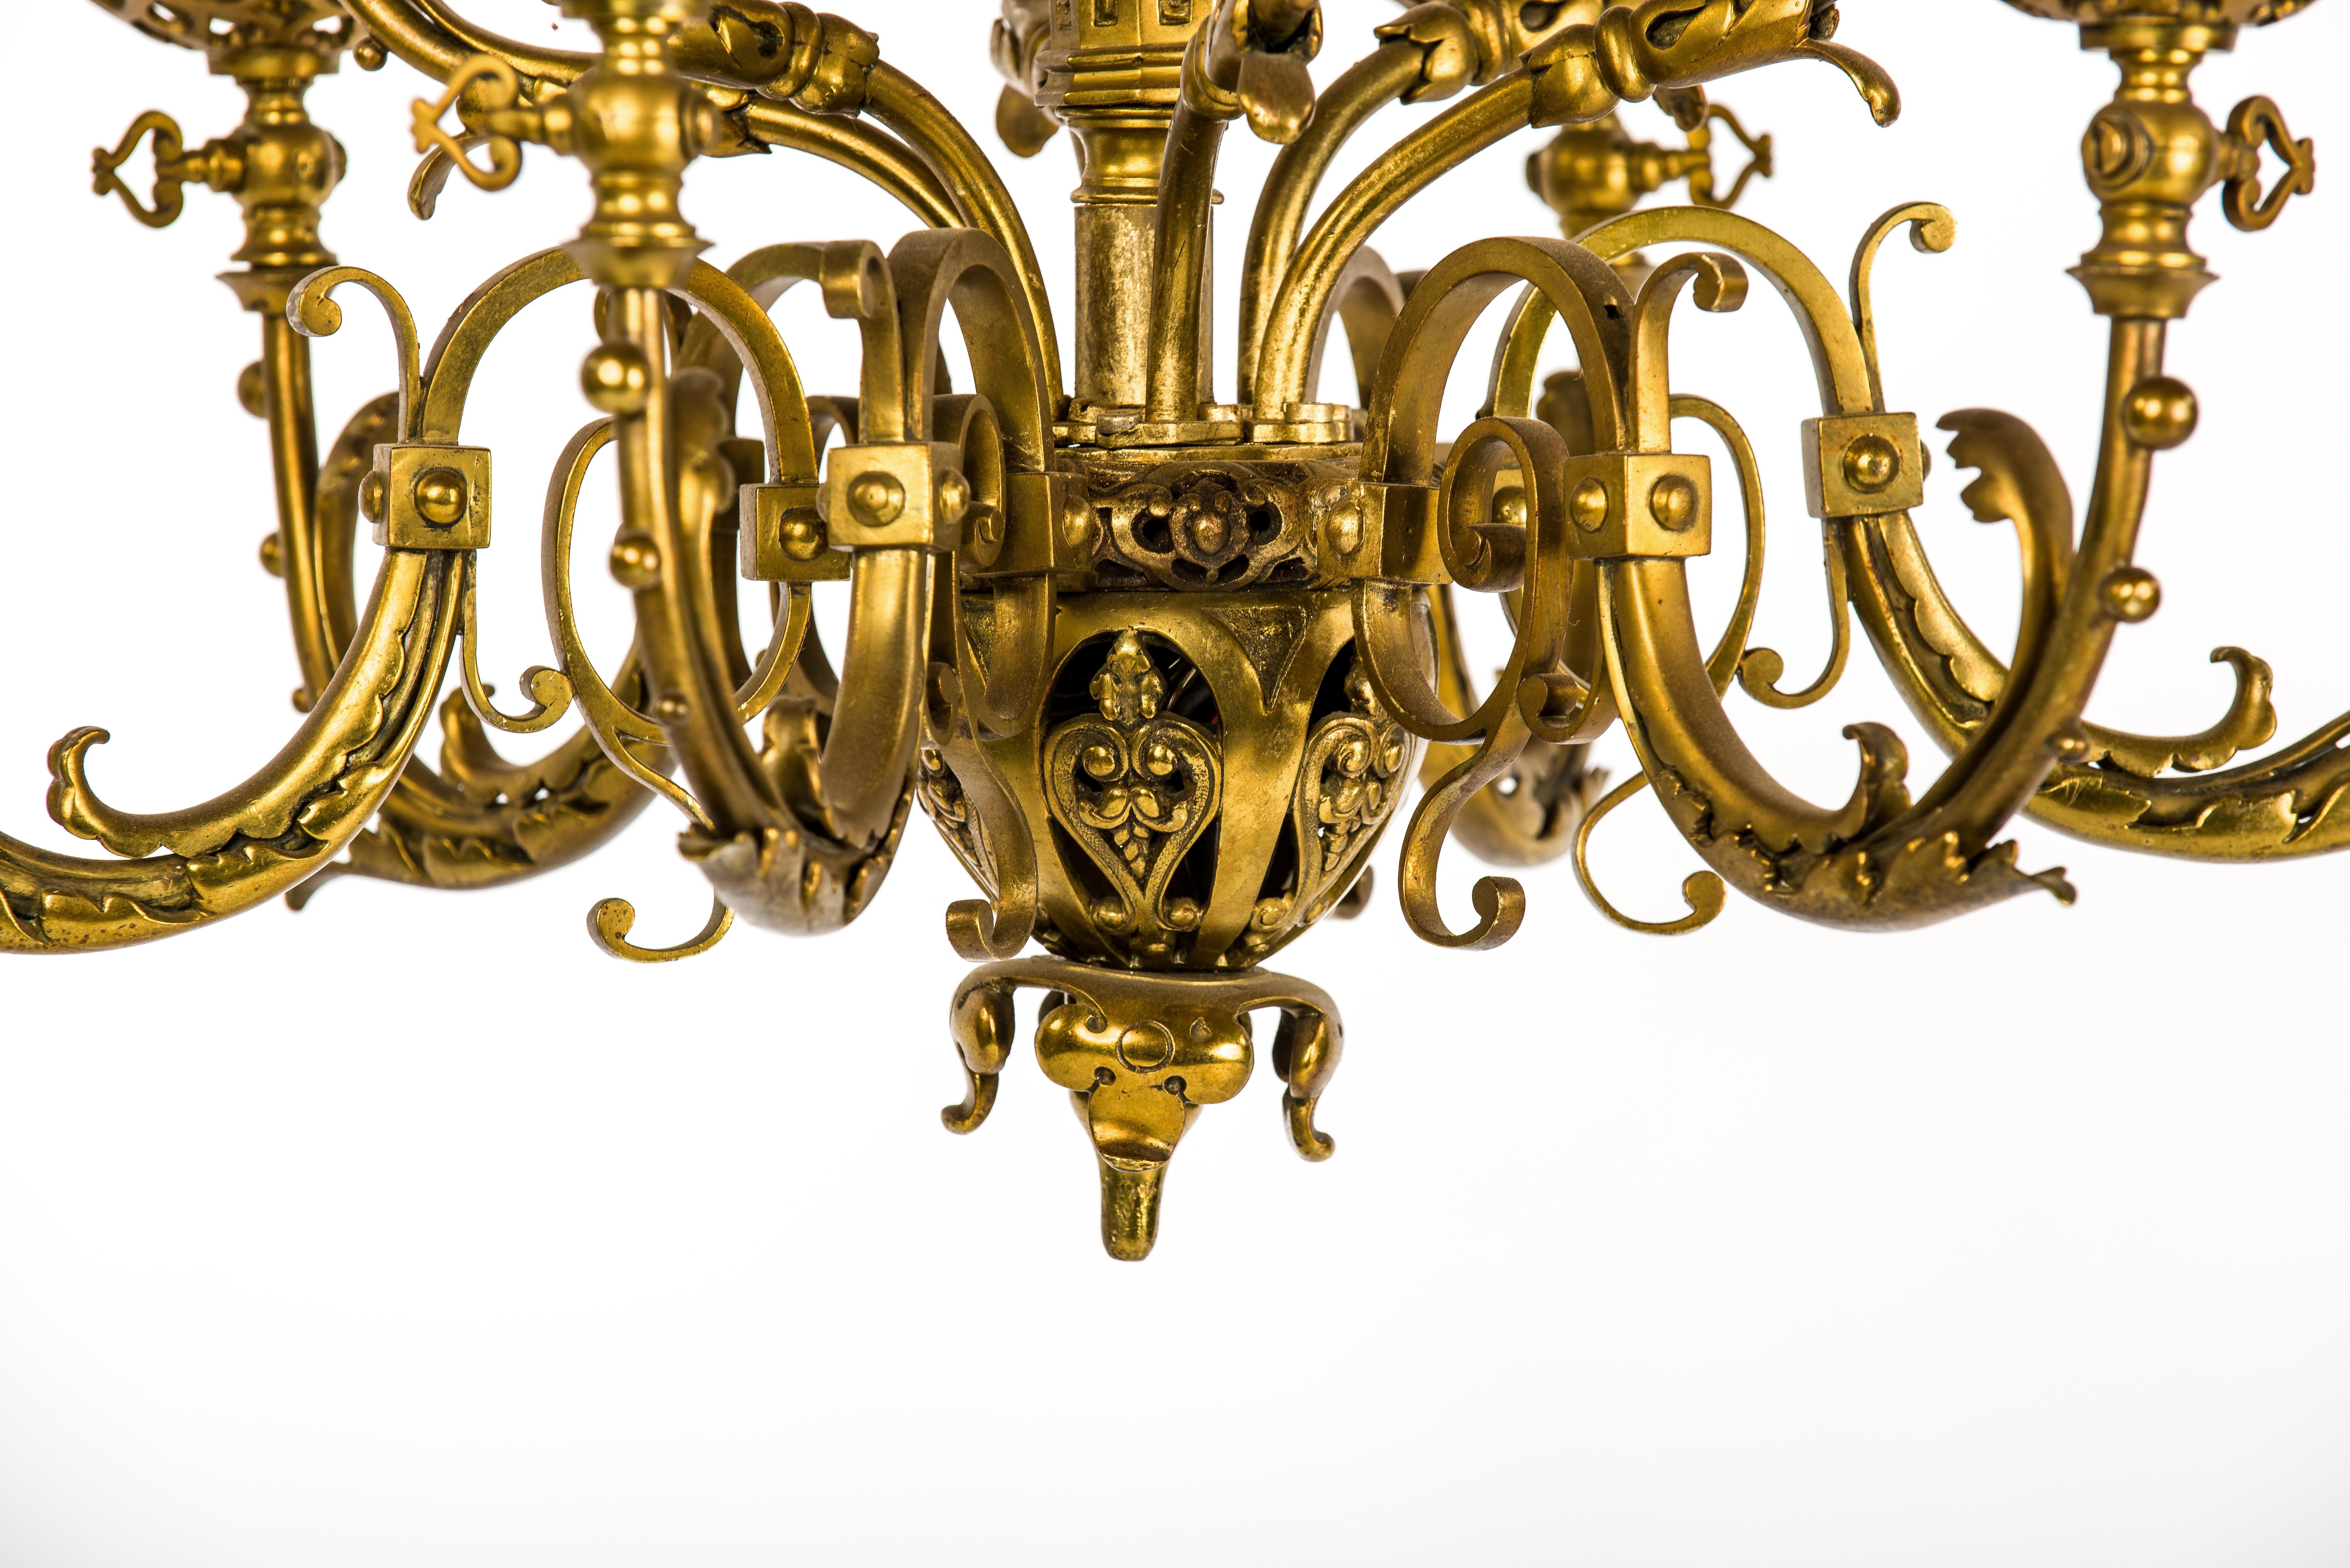 This impressive two-tier chandelier was made in France in the late 19th century. The piece is completely made in brass and it is heavily decorated with many classic Renaissance ornaments such as scrolls and acanthus leaves. The brass ornaments were